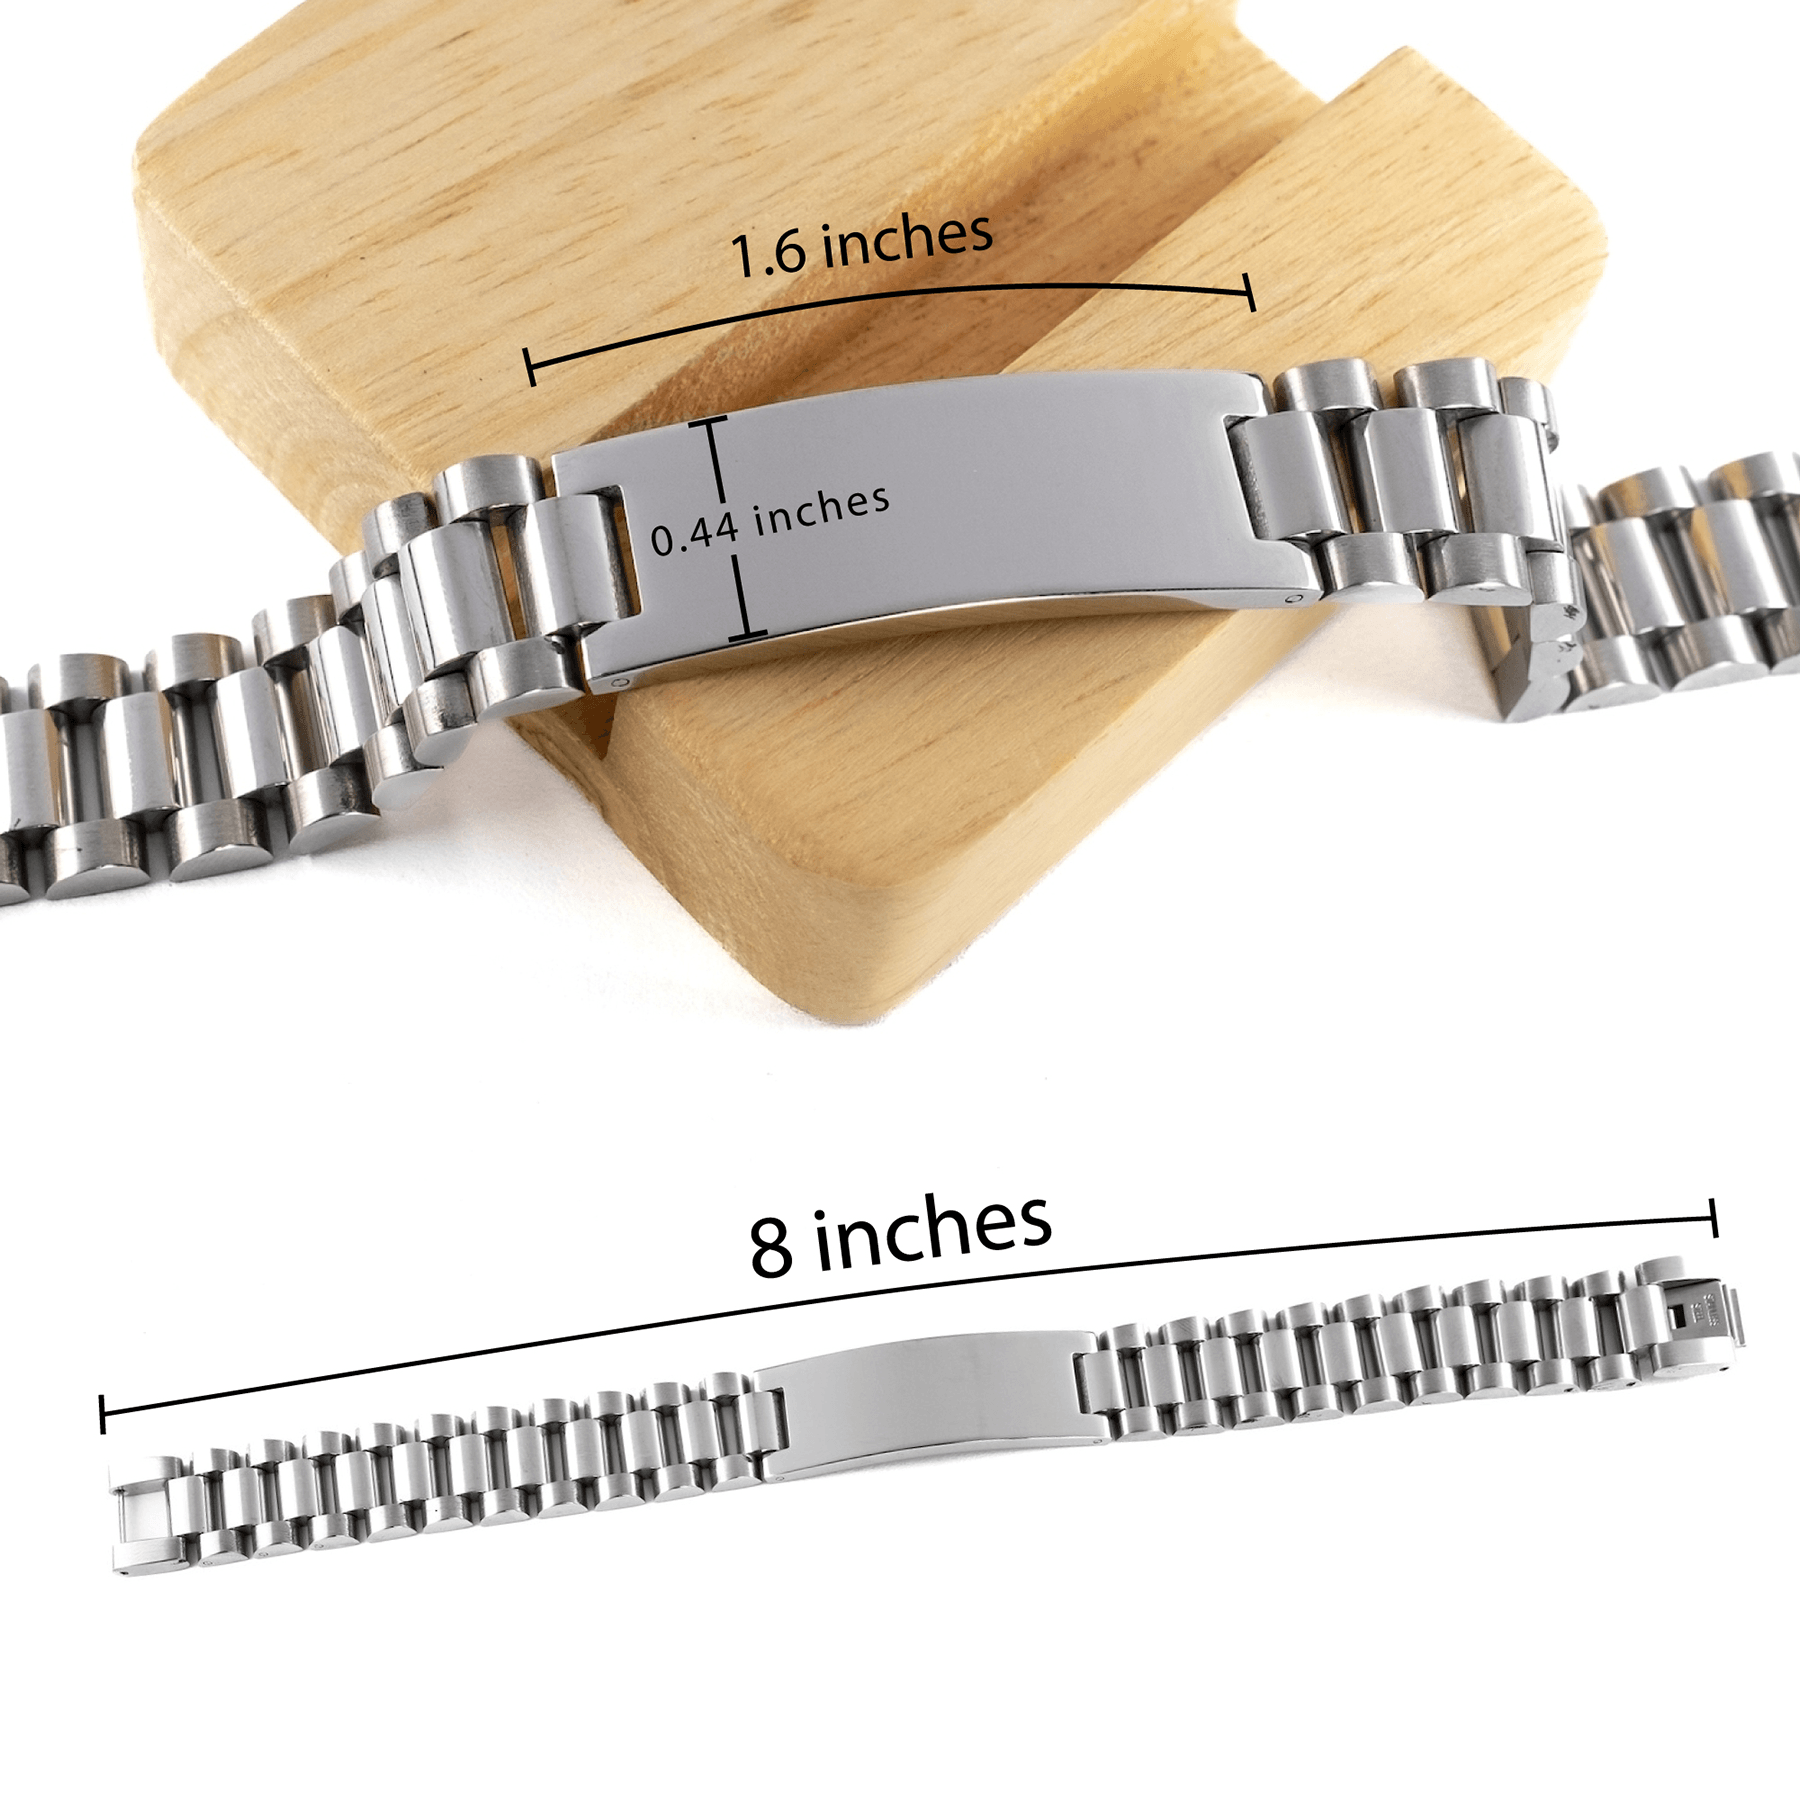 Remarkable Yoga Instructor Gifts, Your dedication and hard work, Inspirational Birthday Christmas Unique Ladder Stainless Steel Bracelet For Yoga Instructor, Coworkers, Men, Women, Friends - Mallard Moon Gift Shop